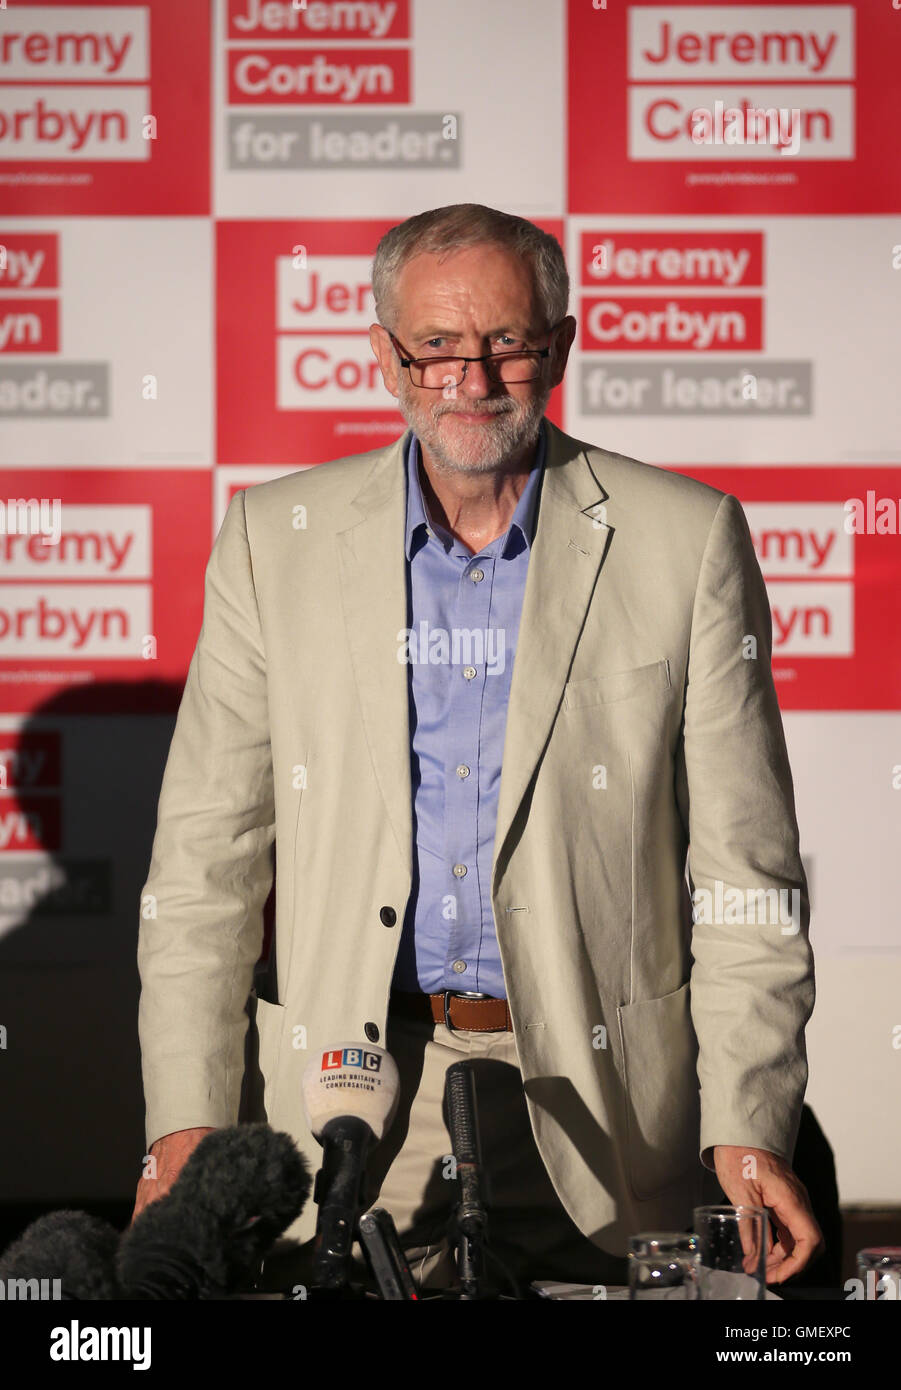 Labour leader Jeremy Corbyn during a Q&A session at a rally at Glasgow's Crowne Plaza Hotel, where the impact of a Corbyn led Labour Government on Scotland was discussed. Stock Photo